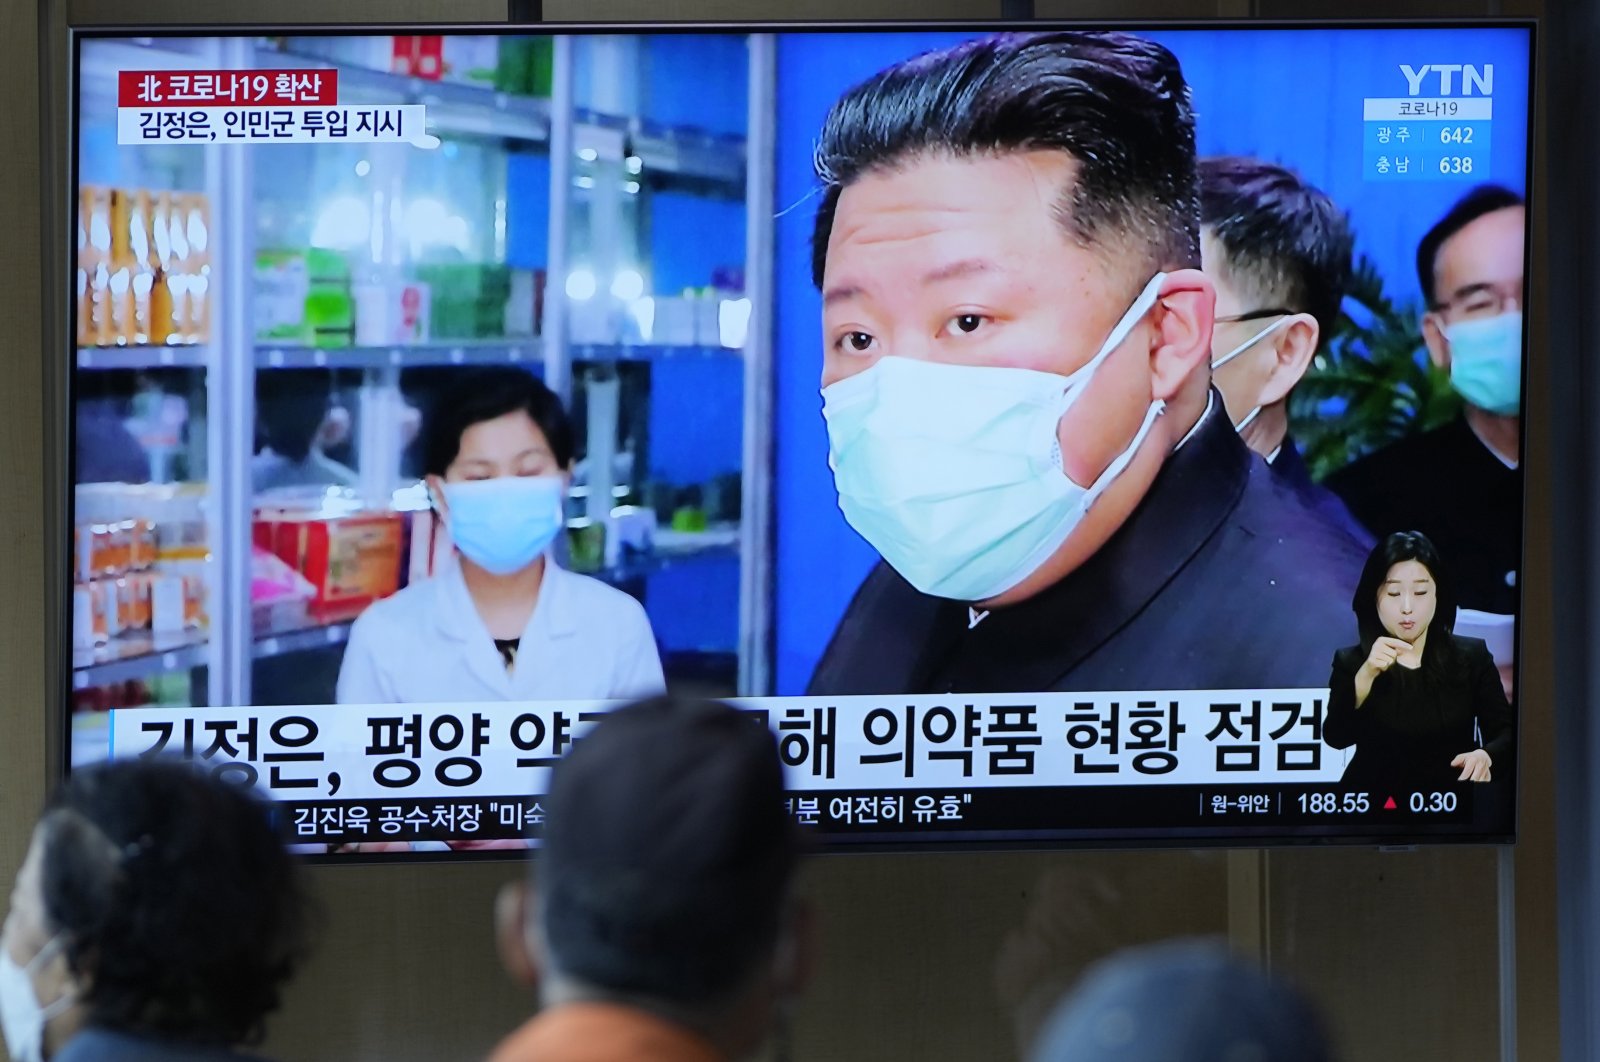 People watch a TV screen showing a news program reporting with an image of North Korean leader Kim Jong Un, at a train station in Seoul, South Korea, May 16, 2022. (AP Photo)